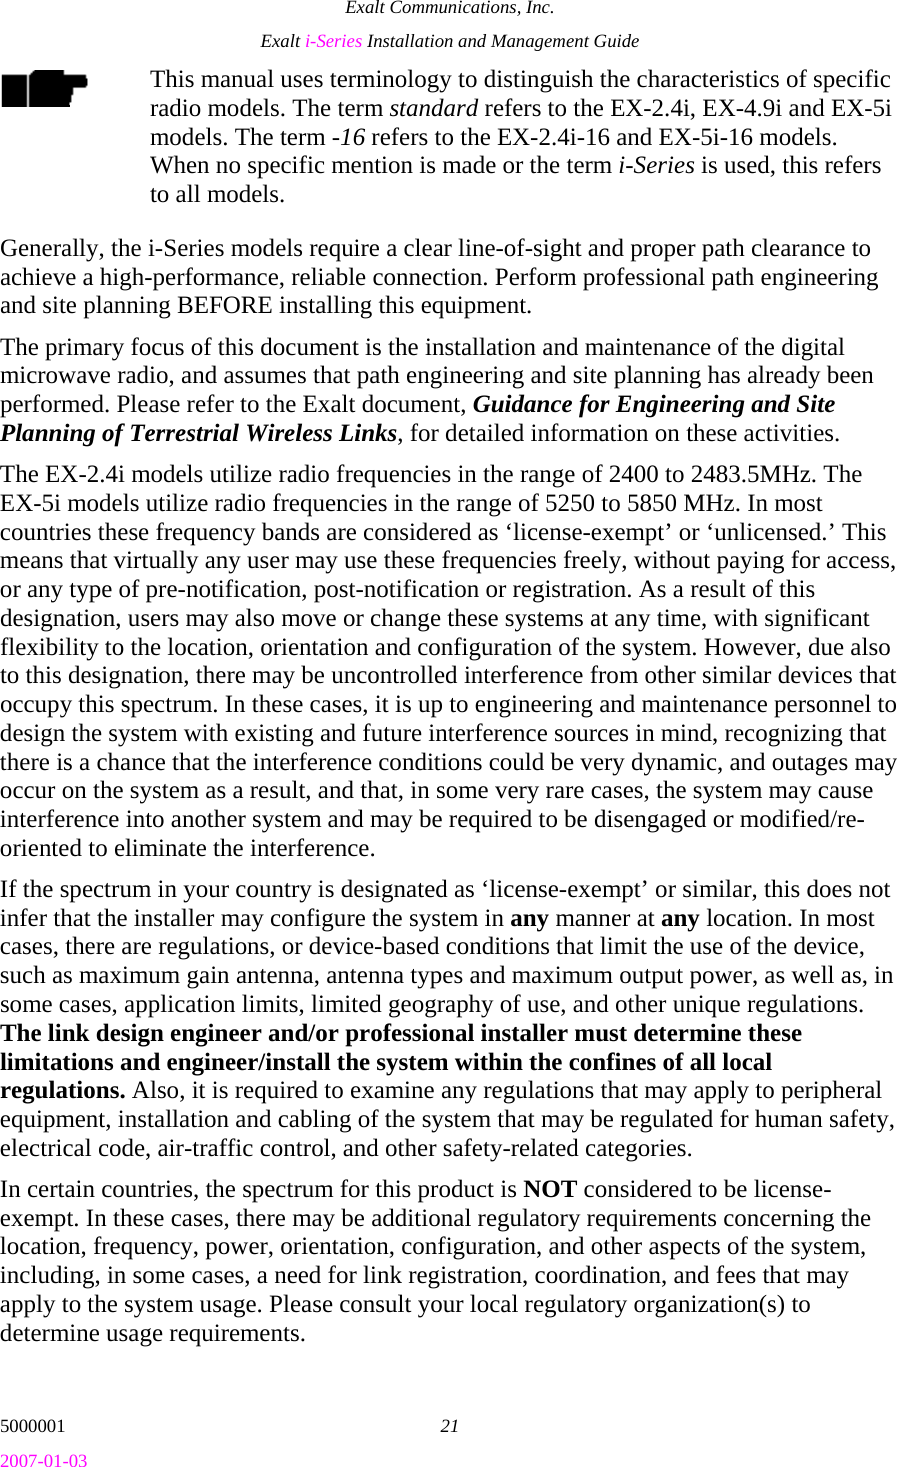 Exalt Communications, Inc. Exalt i-Series Installation and Management Guide 5000001  21 2007-01-03 This manual uses terminology to distinguish the characteristics of specific radio models. The term standard refers to the EX-2.4i, EX-4.9i and EX-5i models. The term -16 refers to the EX-2.4i-16 and EX-5i-16 models. When no specific mention is made or the term i-Series is used, this refers to all models. Generally, the i-Series models require a clear line-of-sight and proper path clearance to achieve a high-performance, reliable connection. Perform professional path engineering and site planning BEFORE installing this equipment.  The primary focus of this document is the installation and maintenance of the digital microwave radio, and assumes that path engineering and site planning has already been performed. Please refer to the Exalt document, Guidance for Engineering and Site Planning of Terrestrial Wireless Links, for detailed information on these activities. The EX-2.4i models utilize radio frequencies in the range of 2400 to 2483.5MHz. The EX-5i models utilize radio frequencies in the range of 5250 to 5850 MHz. In most countries these frequency bands are considered as ‘license-exempt’ or ‘unlicensed.’ This means that virtually any user may use these frequencies freely, without paying for access, or any type of pre-notification, post-notification or registration. As a result of this designation, users may also move or change these systems at any time, with significant flexibility to the location, orientation and configuration of the system. However, due also to this designation, there may be uncontrolled interference from other similar devices that occupy this spectrum. In these cases, it is up to engineering and maintenance personnel to design the system with existing and future interference sources in mind, recognizing that there is a chance that the interference conditions could be very dynamic, and outages may occur on the system as a result, and that, in some very rare cases, the system may cause interference into another system and may be required to be disengaged or modified/re-oriented to eliminate the interference. If the spectrum in your country is designated as ‘license-exempt’ or similar, this does not infer that the installer may configure the system in any manner at any location. In most cases, there are regulations, or device-based conditions that limit the use of the device, such as maximum gain antenna, antenna types and maximum output power, as well as, in some cases, application limits, limited geography of use, and other unique regulations. The link design engineer and/or professional installer must determine these limitations and engineer/install the system within the confines of all local regulations. Also, it is required to examine any regulations that may apply to peripheral equipment, installation and cabling of the system that may be regulated for human safety, electrical code, air-traffic control, and other safety-related categories. In certain countries, the spectrum for this product is NOT considered to be license-exempt. In these cases, there may be additional regulatory requirements concerning the location, frequency, power, orientation, configuration, and other aspects of the system, including, in some cases, a need for link registration, coordination, and fees that may apply to the system usage. Please consult your local regulatory organization(s) to determine usage requirements. 